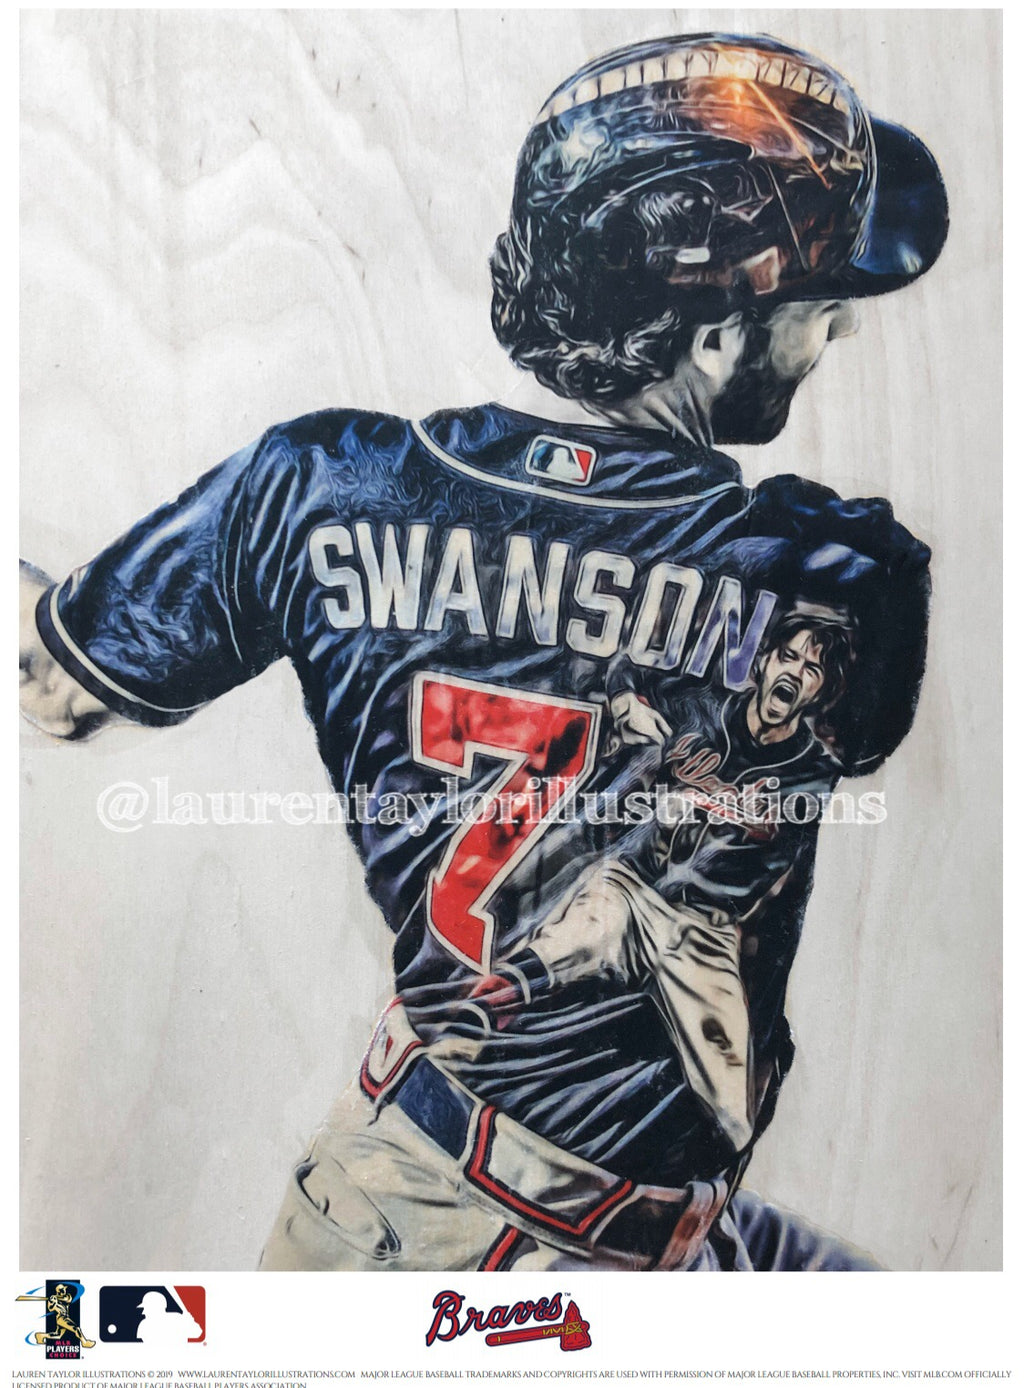 "Swanson" (Dansby Swanson) Atlanta Braves - Officially Licensed MLB Print - Limited Release